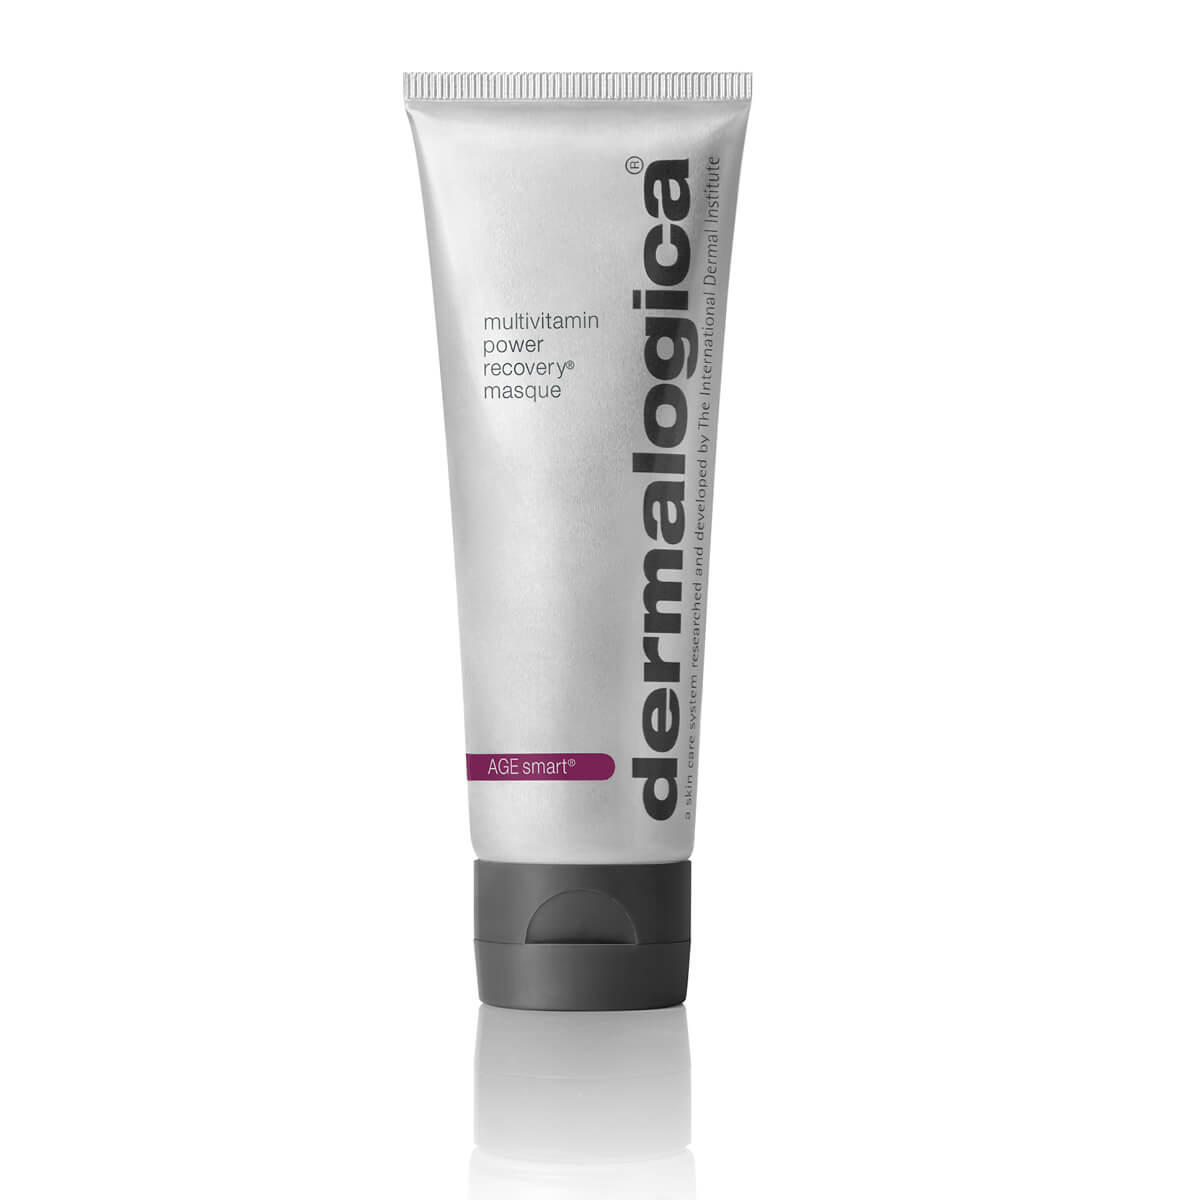 multivitamin power recovery masque 